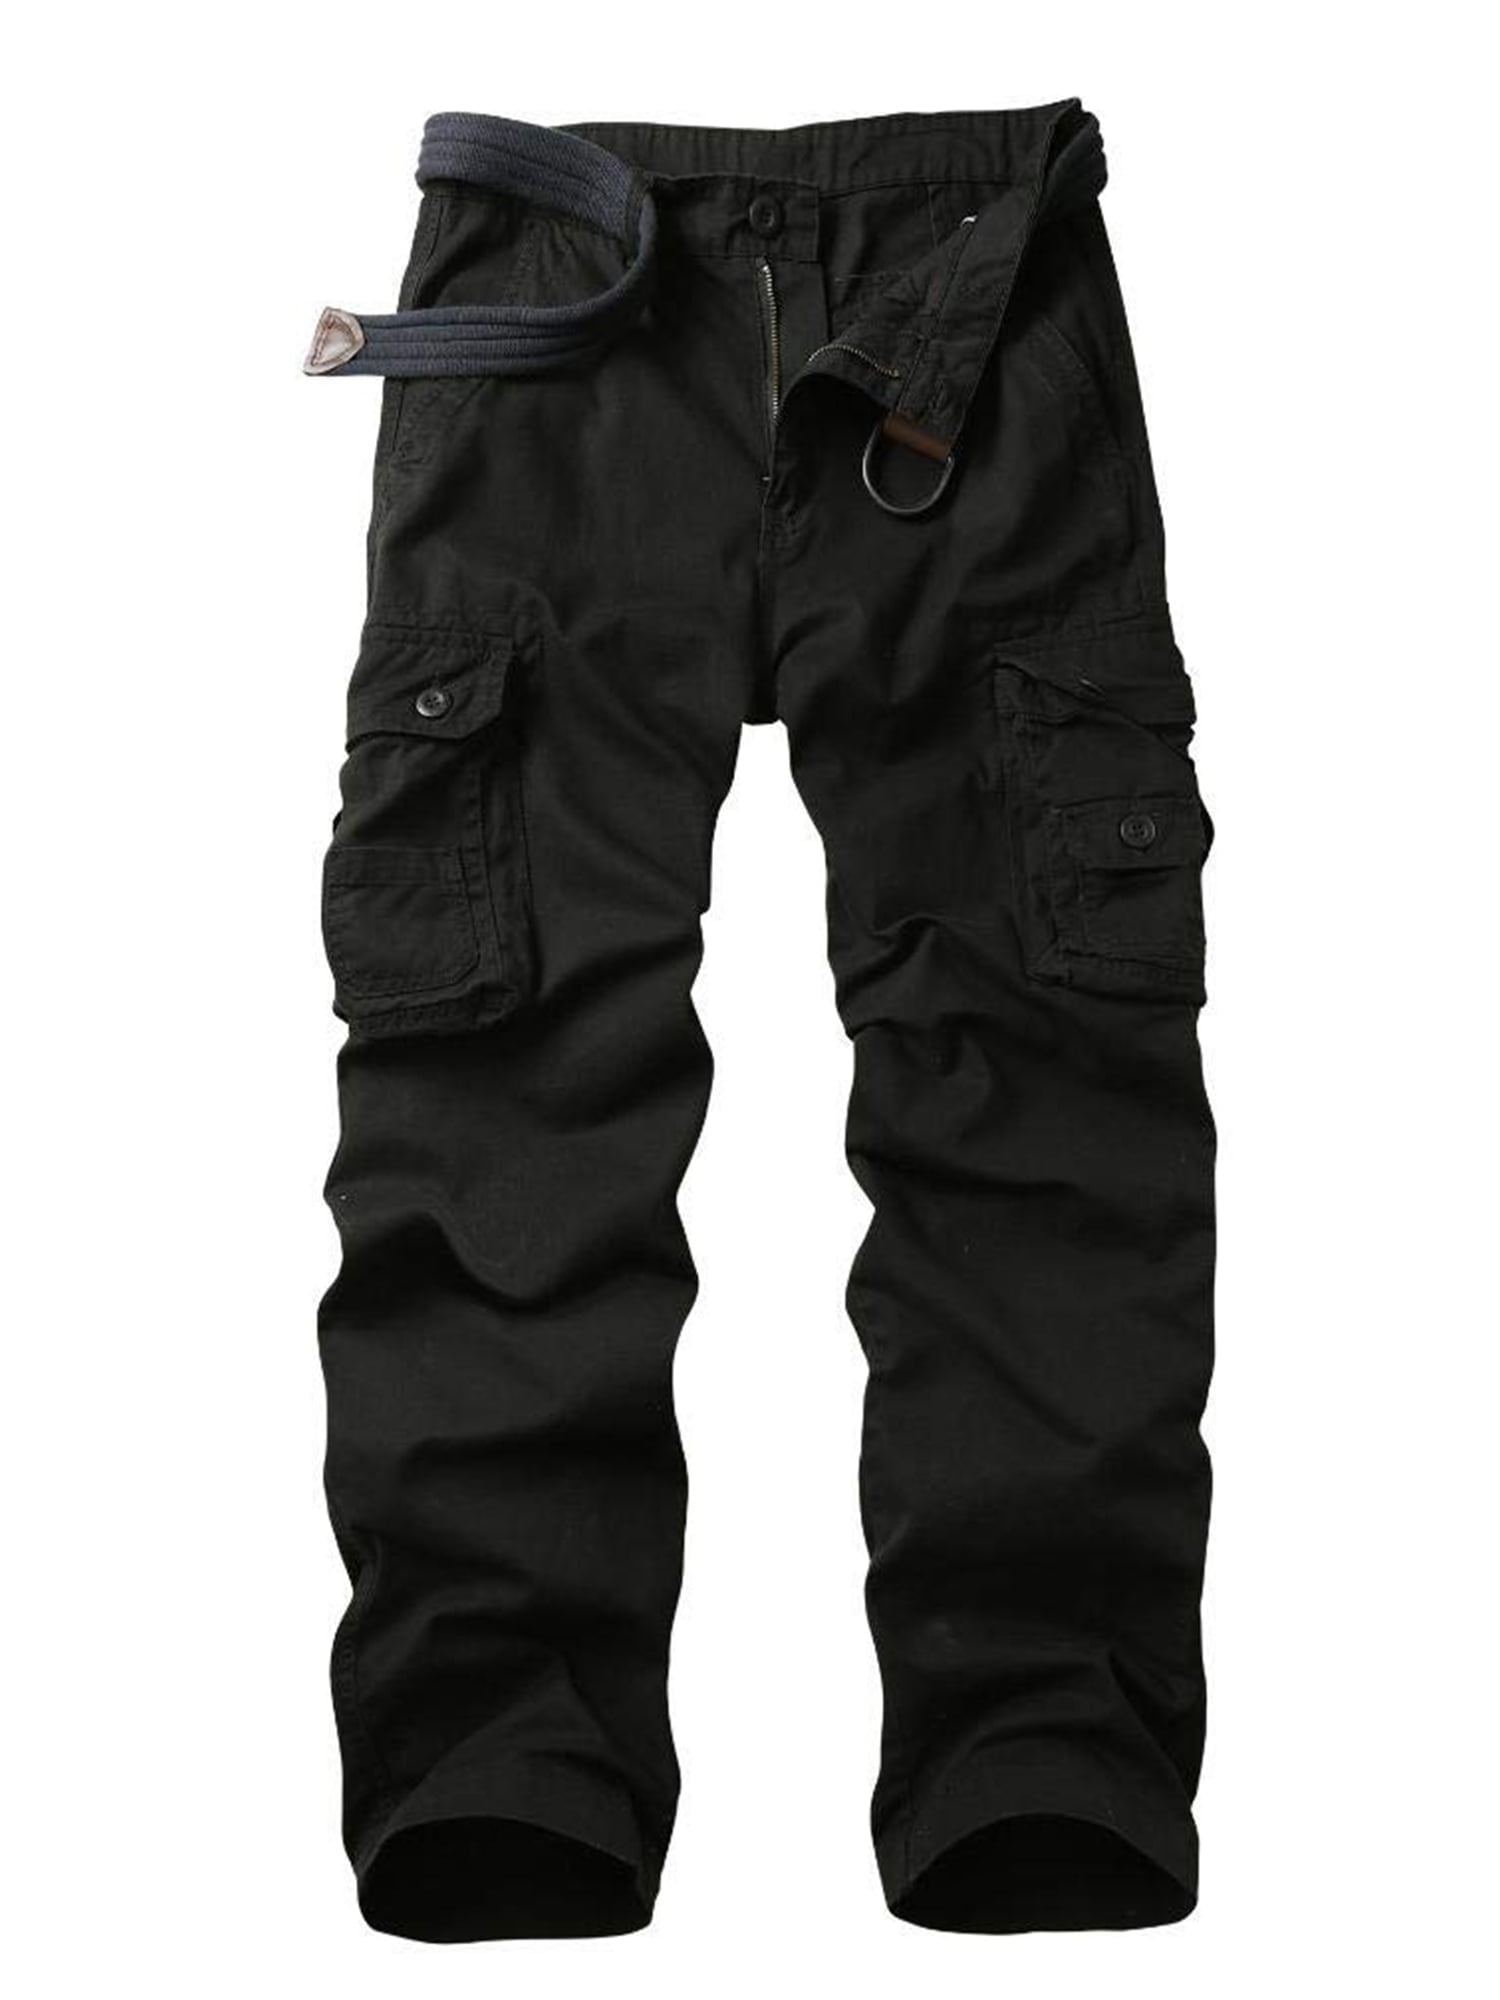 TRGPSG Men's Cargo Pants with Multi Pockets Outdoor Cotton